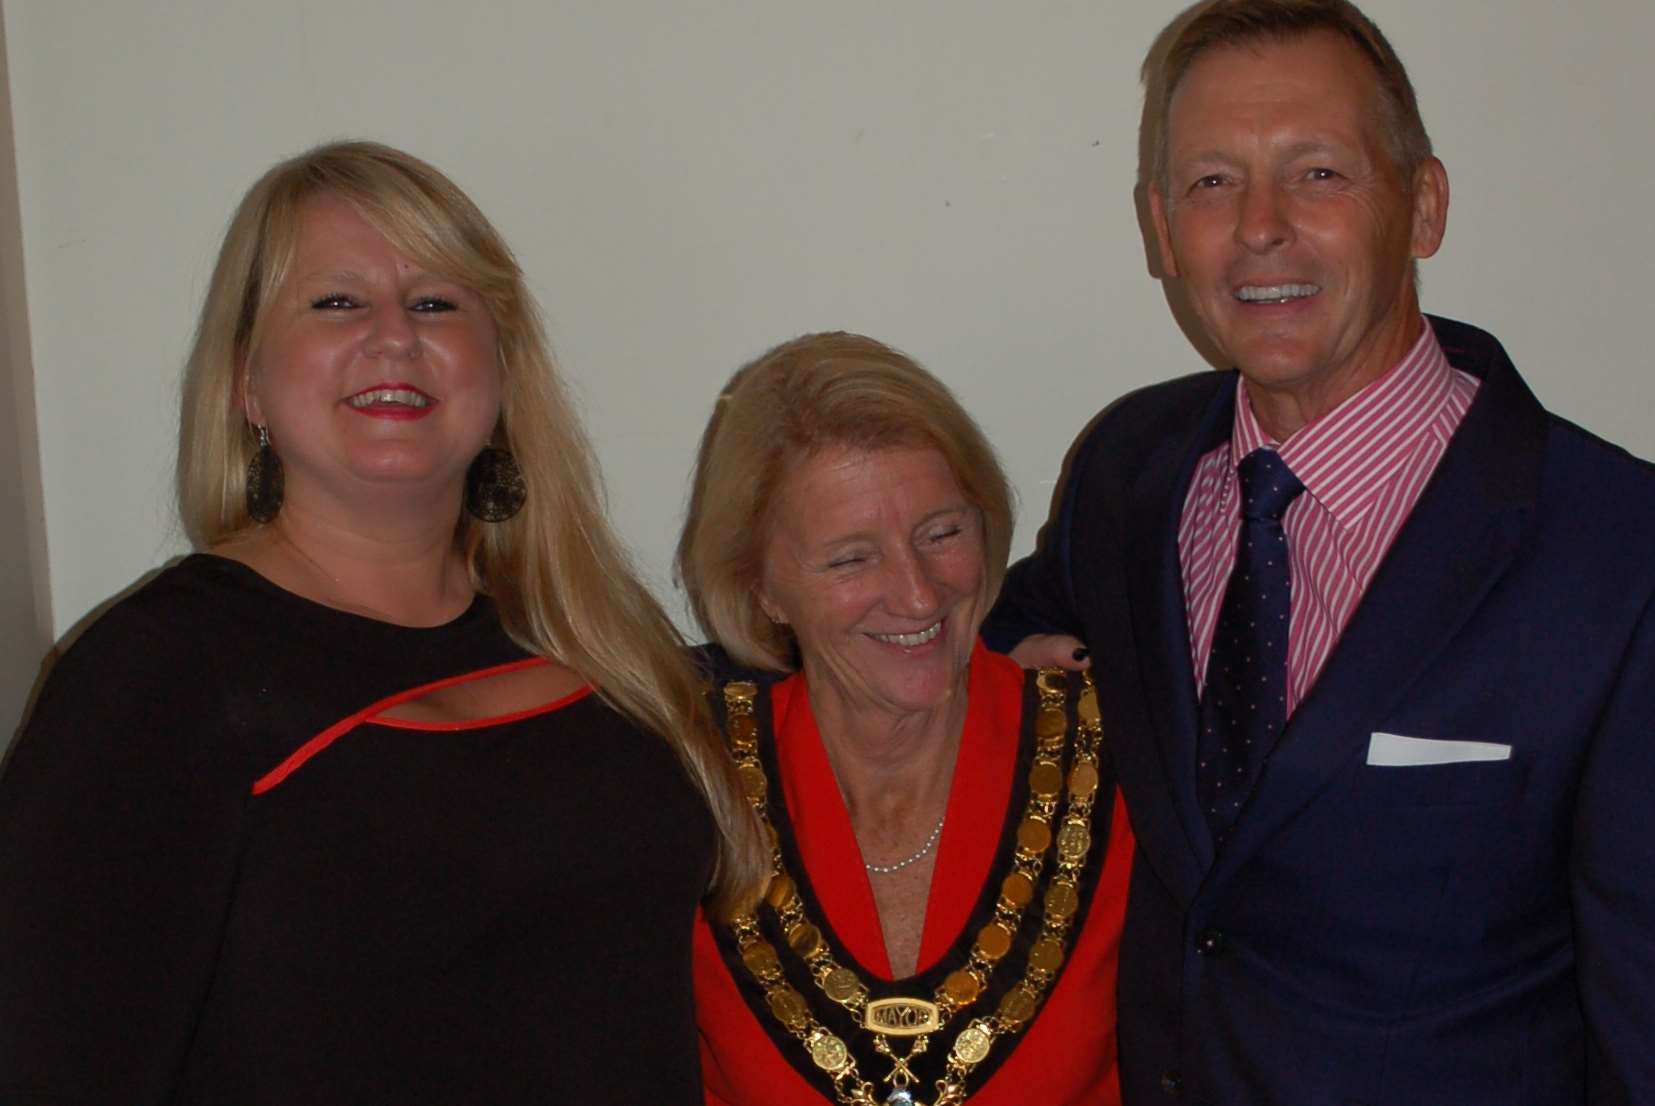 The Mayor of Tonbridge and Malling celebrated the shortlisting with staff from Hale Place